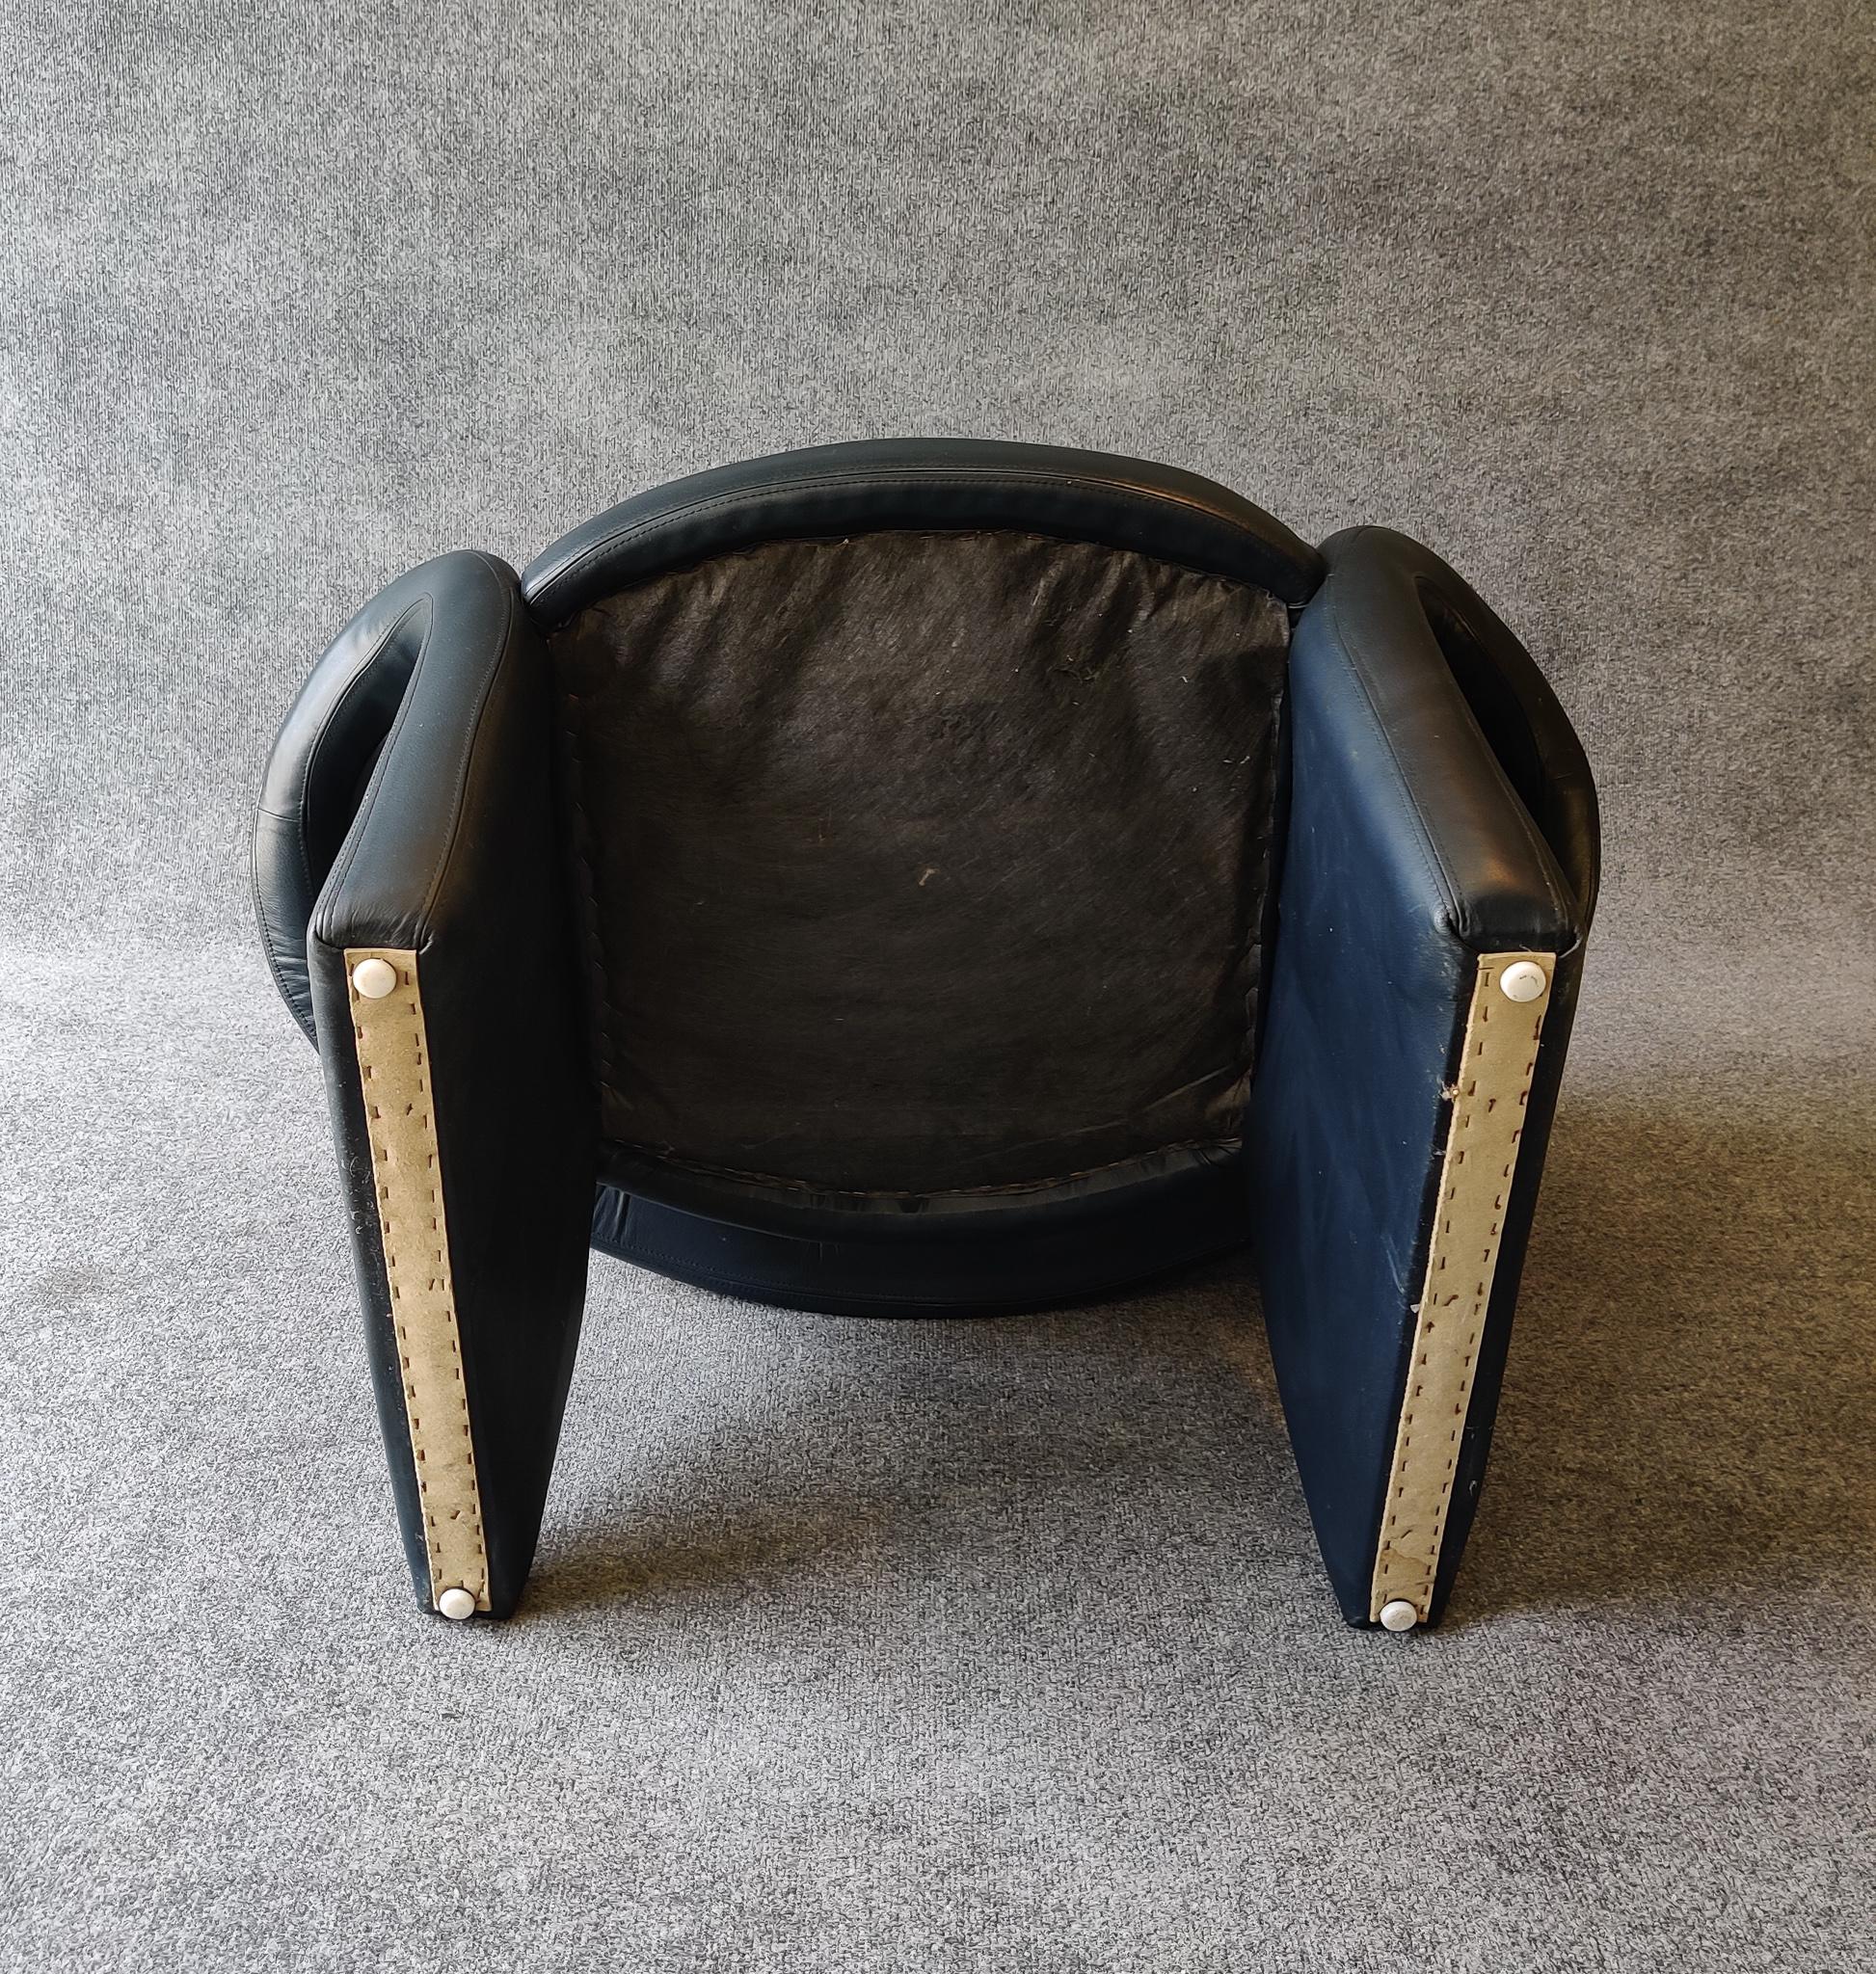 Post-Modern 1980s, Sculptural Dark Blue Leather Lounge Chair Pierre Paulin Style For Sale 3